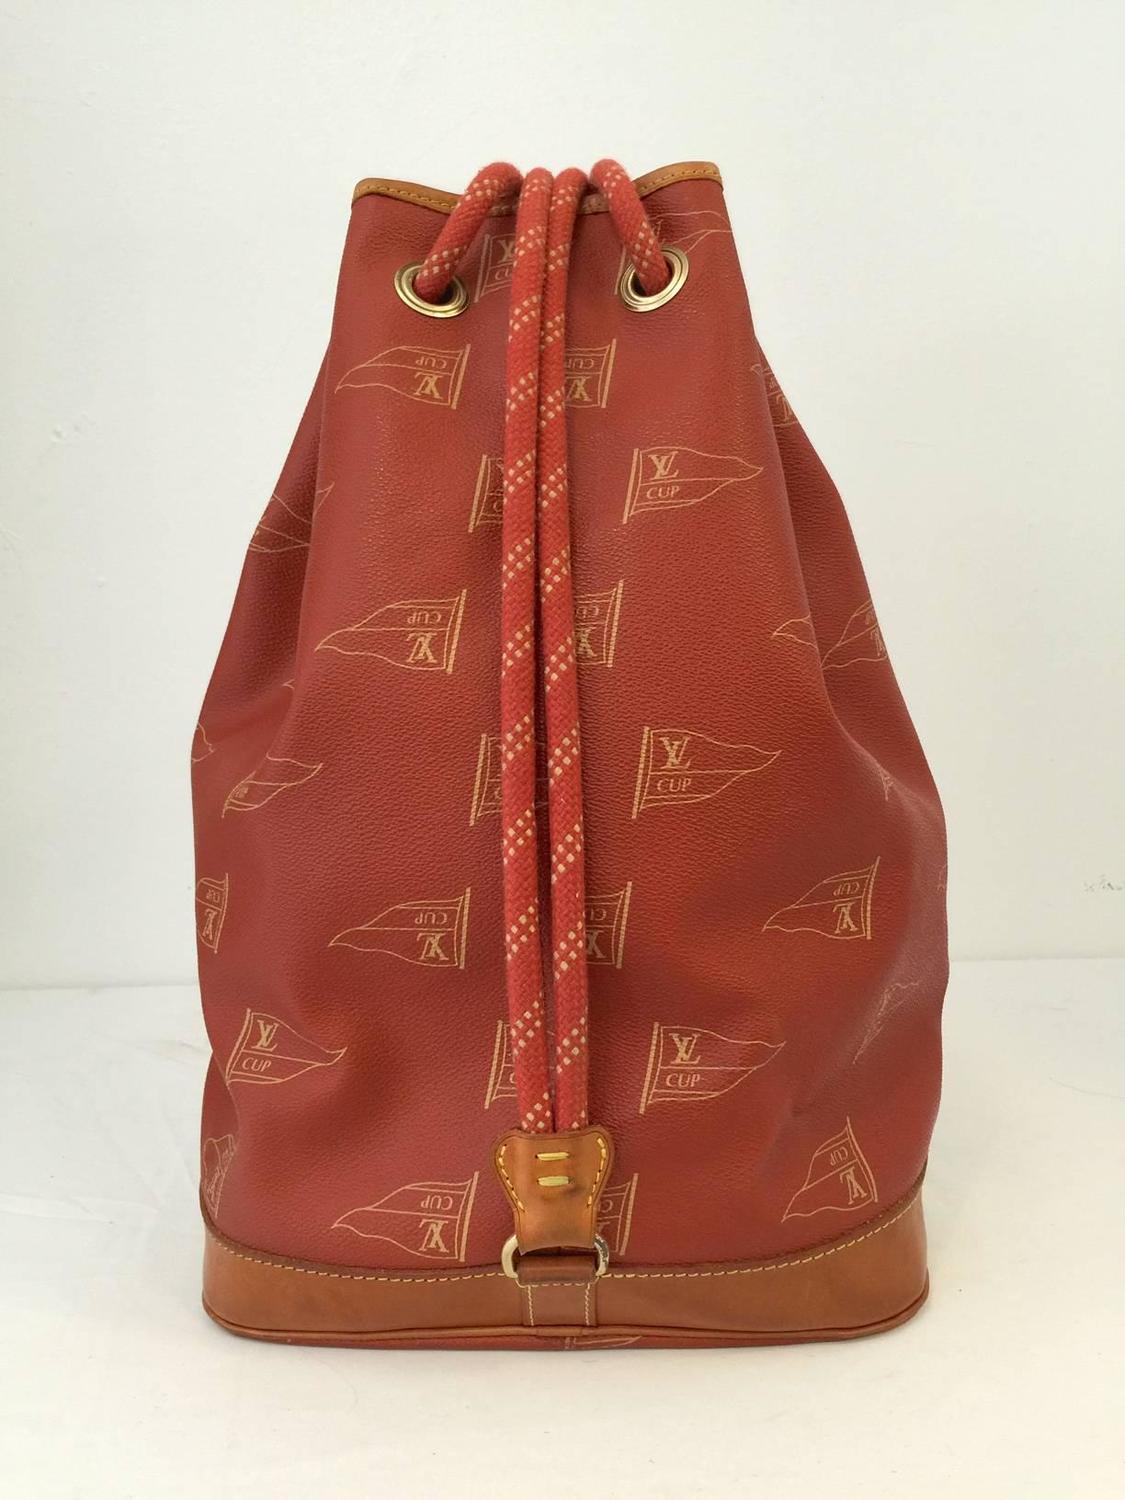 Louis Vuitton Cup Bag No.0184 | Confederated Tribes of the Umatilla Indian Reservation